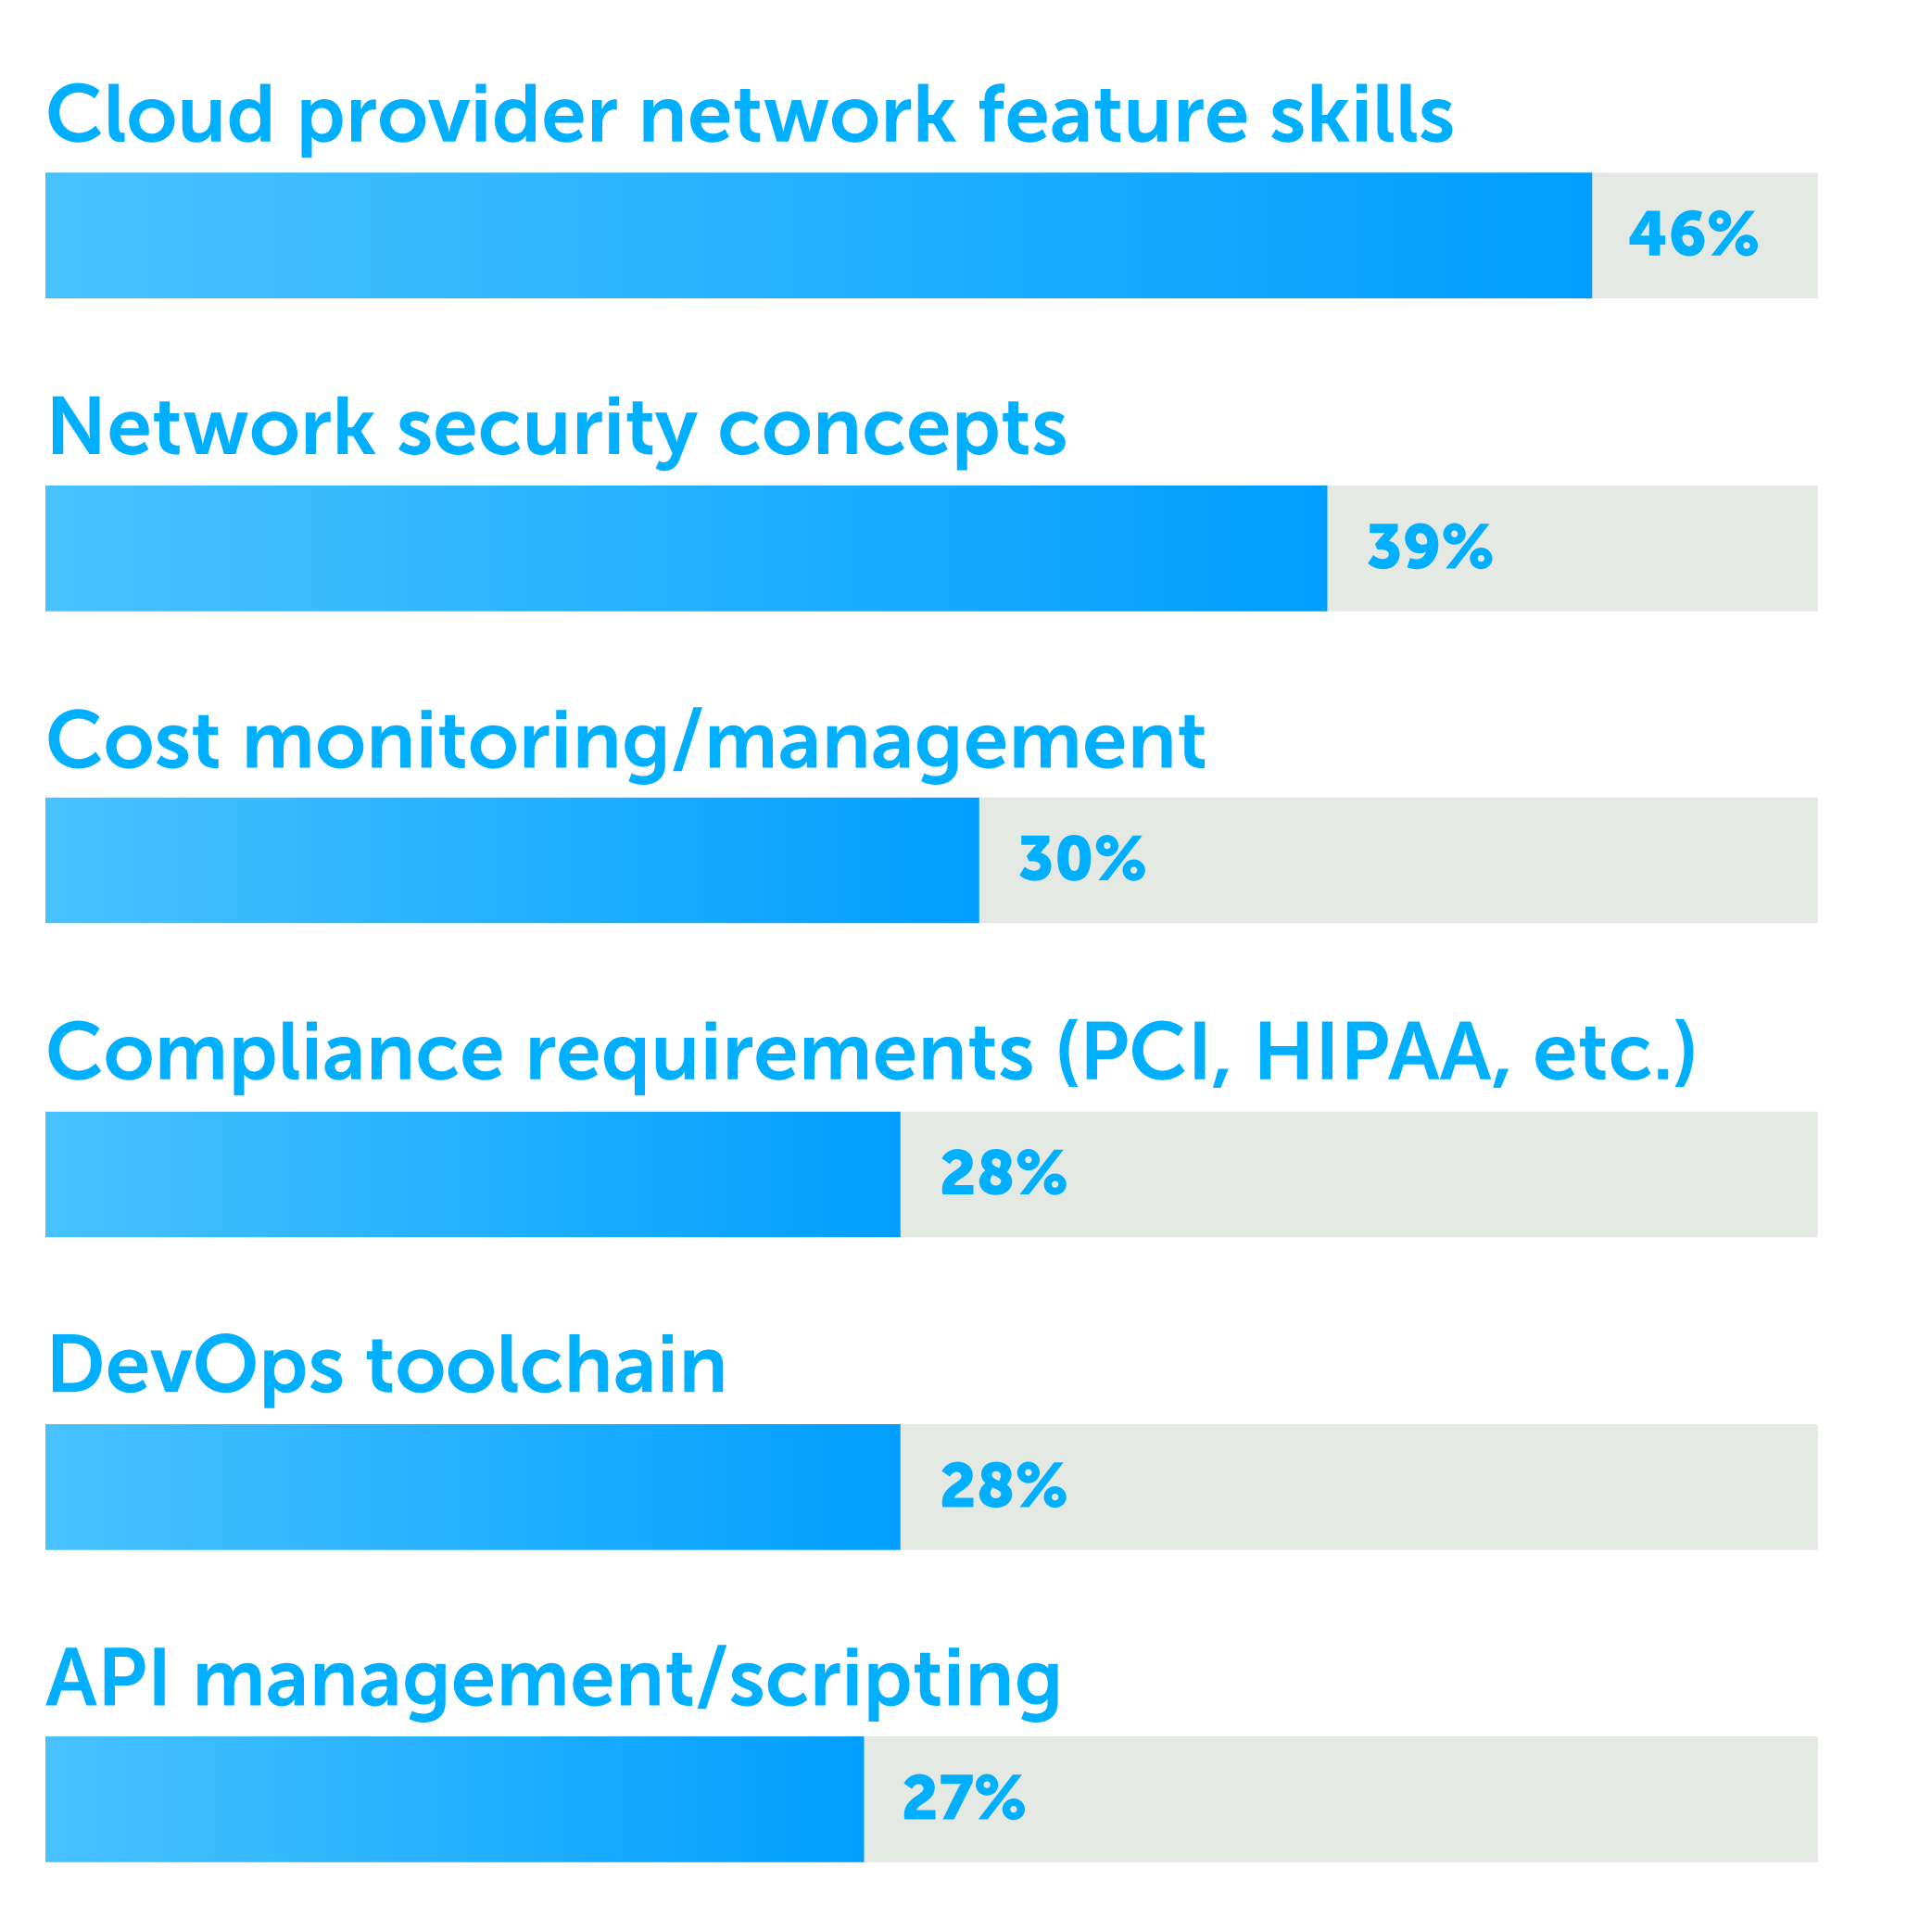 Knowledge and skills most important to building and managing hybrid cloud networks